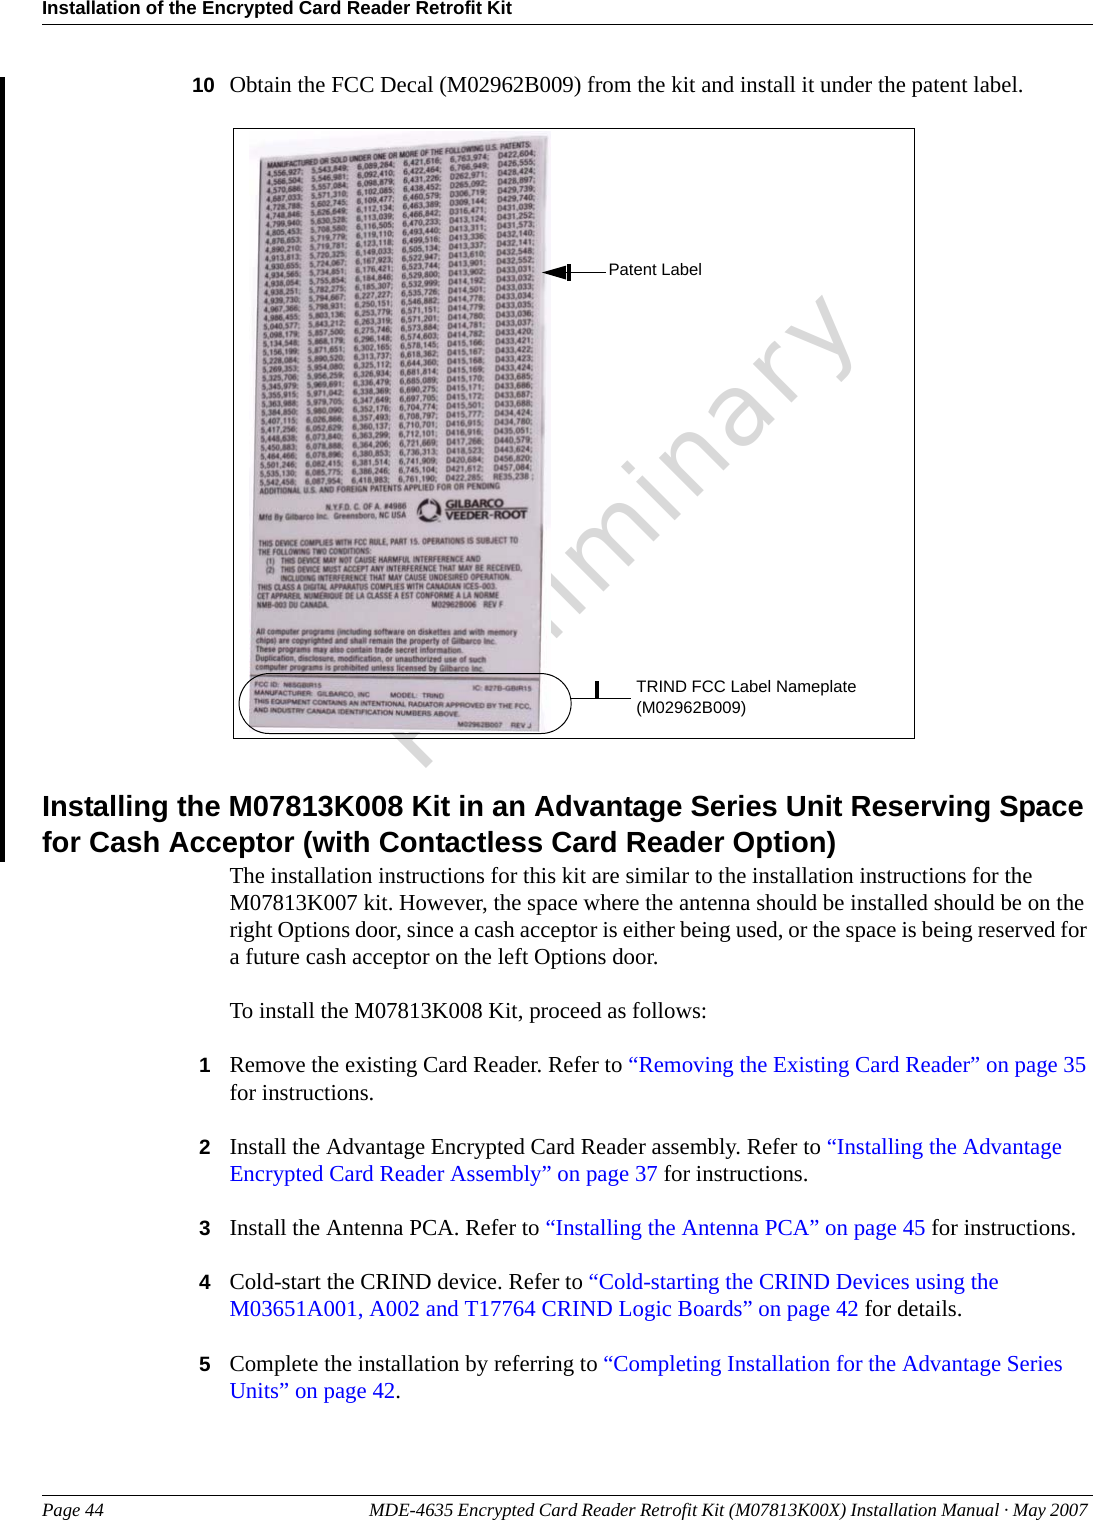 Installation of the Encrypted Card Reader Retrofit KitPage 44 MDE-4635 Encrypted Card Reader Retrofit Kit (M07813K00X) Installation Manual · May 2007 Preliminary10 Obtain the FCC Decal (M02962B009) from the kit and install it under the patent label.TRIND FCC Label Nameplate (M02962B009)Patent LabelInstalling the M07813K008 Kit in an Advantage Series Unit Reserving Space for Cash Acceptor (with Contactless Card Reader Option)The installation instructions for this kit are similar to the installation instructions for the M07813K007 kit. However, the space where the antenna should be installed should be on the right Options door, since a cash acceptor is either being used, or the space is being reserved for a future cash acceptor on the left Options door.To install the M07813K008 Kit, proceed as follows:1Remove the existing Card Reader. Refer to “Removing the Existing Card Reader” on page 35 for instructions.2Install the Advantage Encrypted Card Reader assembly. Refer to “Installing the Advantage Encrypted Card Reader Assembly” on page 37 for instructions.3Install the Antenna PCA. Refer to “Installing the Antenna PCA” on page 45 for instructions.4Cold-start the CRIND device. Refer to “Cold-starting the CRIND Devices using the M03651A001, A002 and T17764 CRIND Logic Boards” on page 42 for details.5Complete the installation by referring to “Completing Installation for the Advantage Series Units” on page 42.